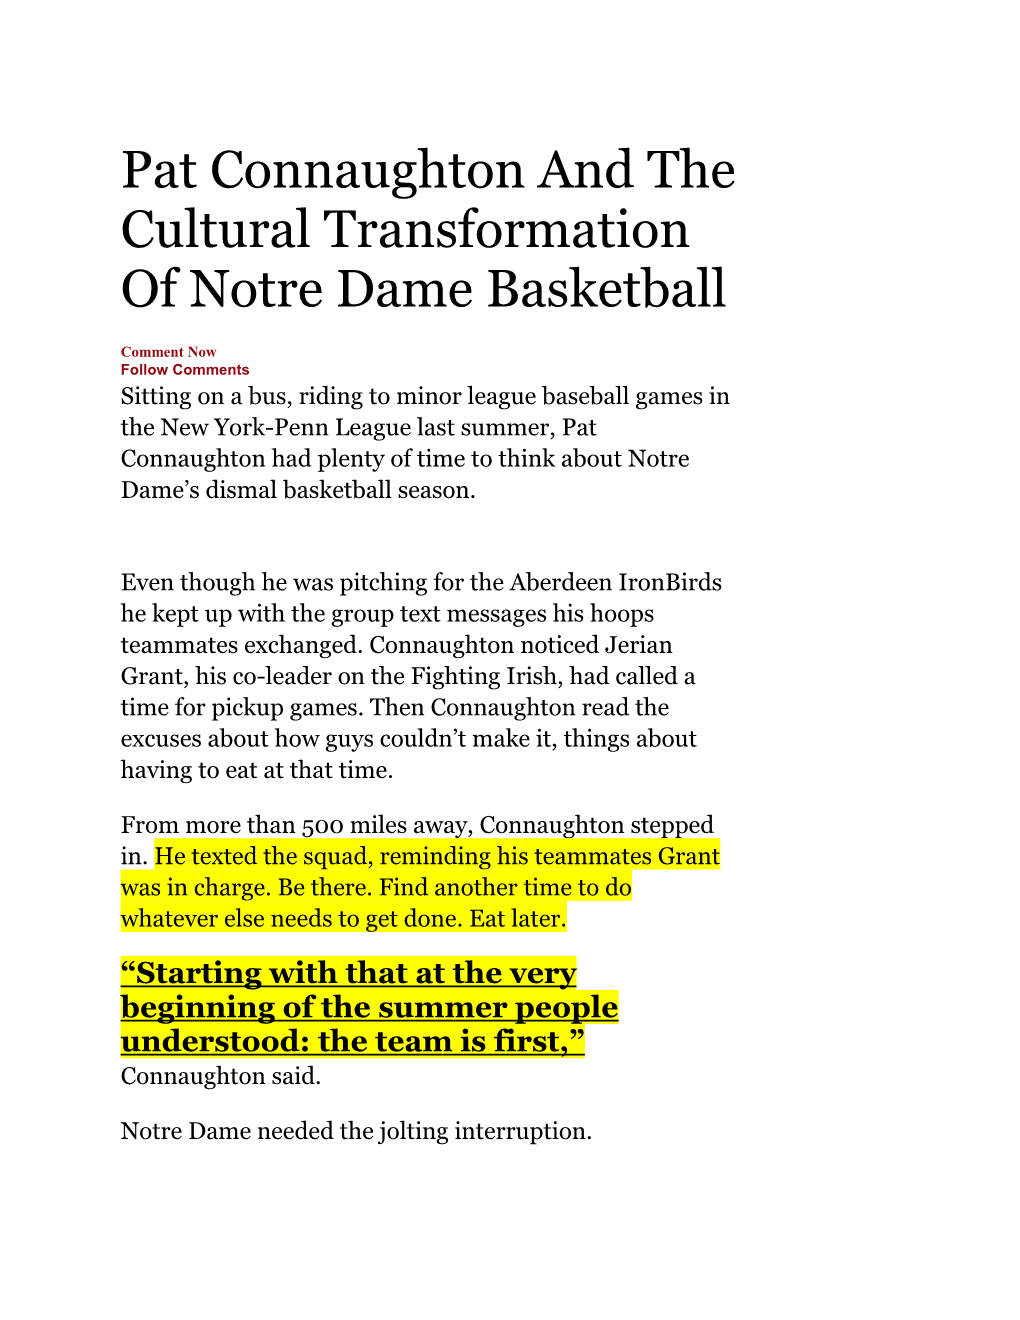 Pat Connaughton and the Cultural Transformation of Notre Dame Basketball